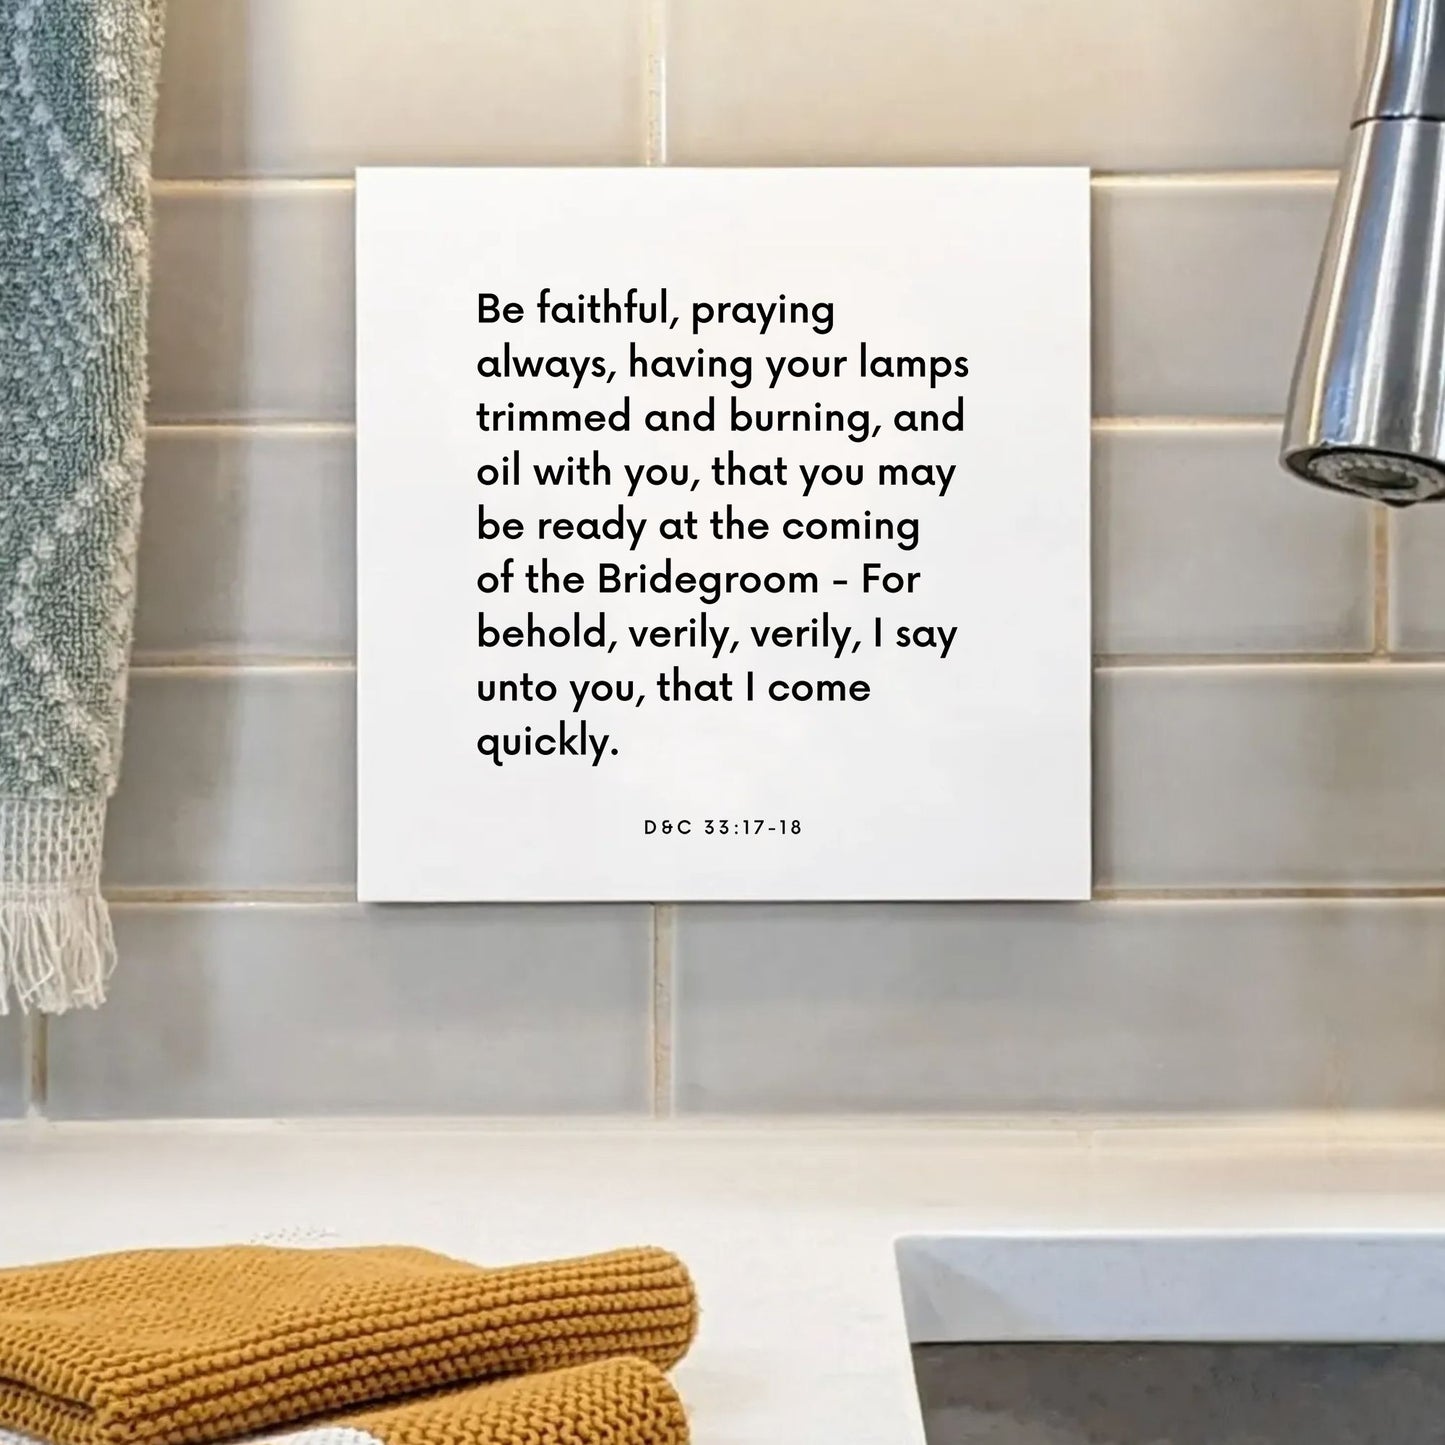 Sink mouting of the scripture tile for D&C 33:17-18 - "Be faithful, praying always, having your lamps trimmed"